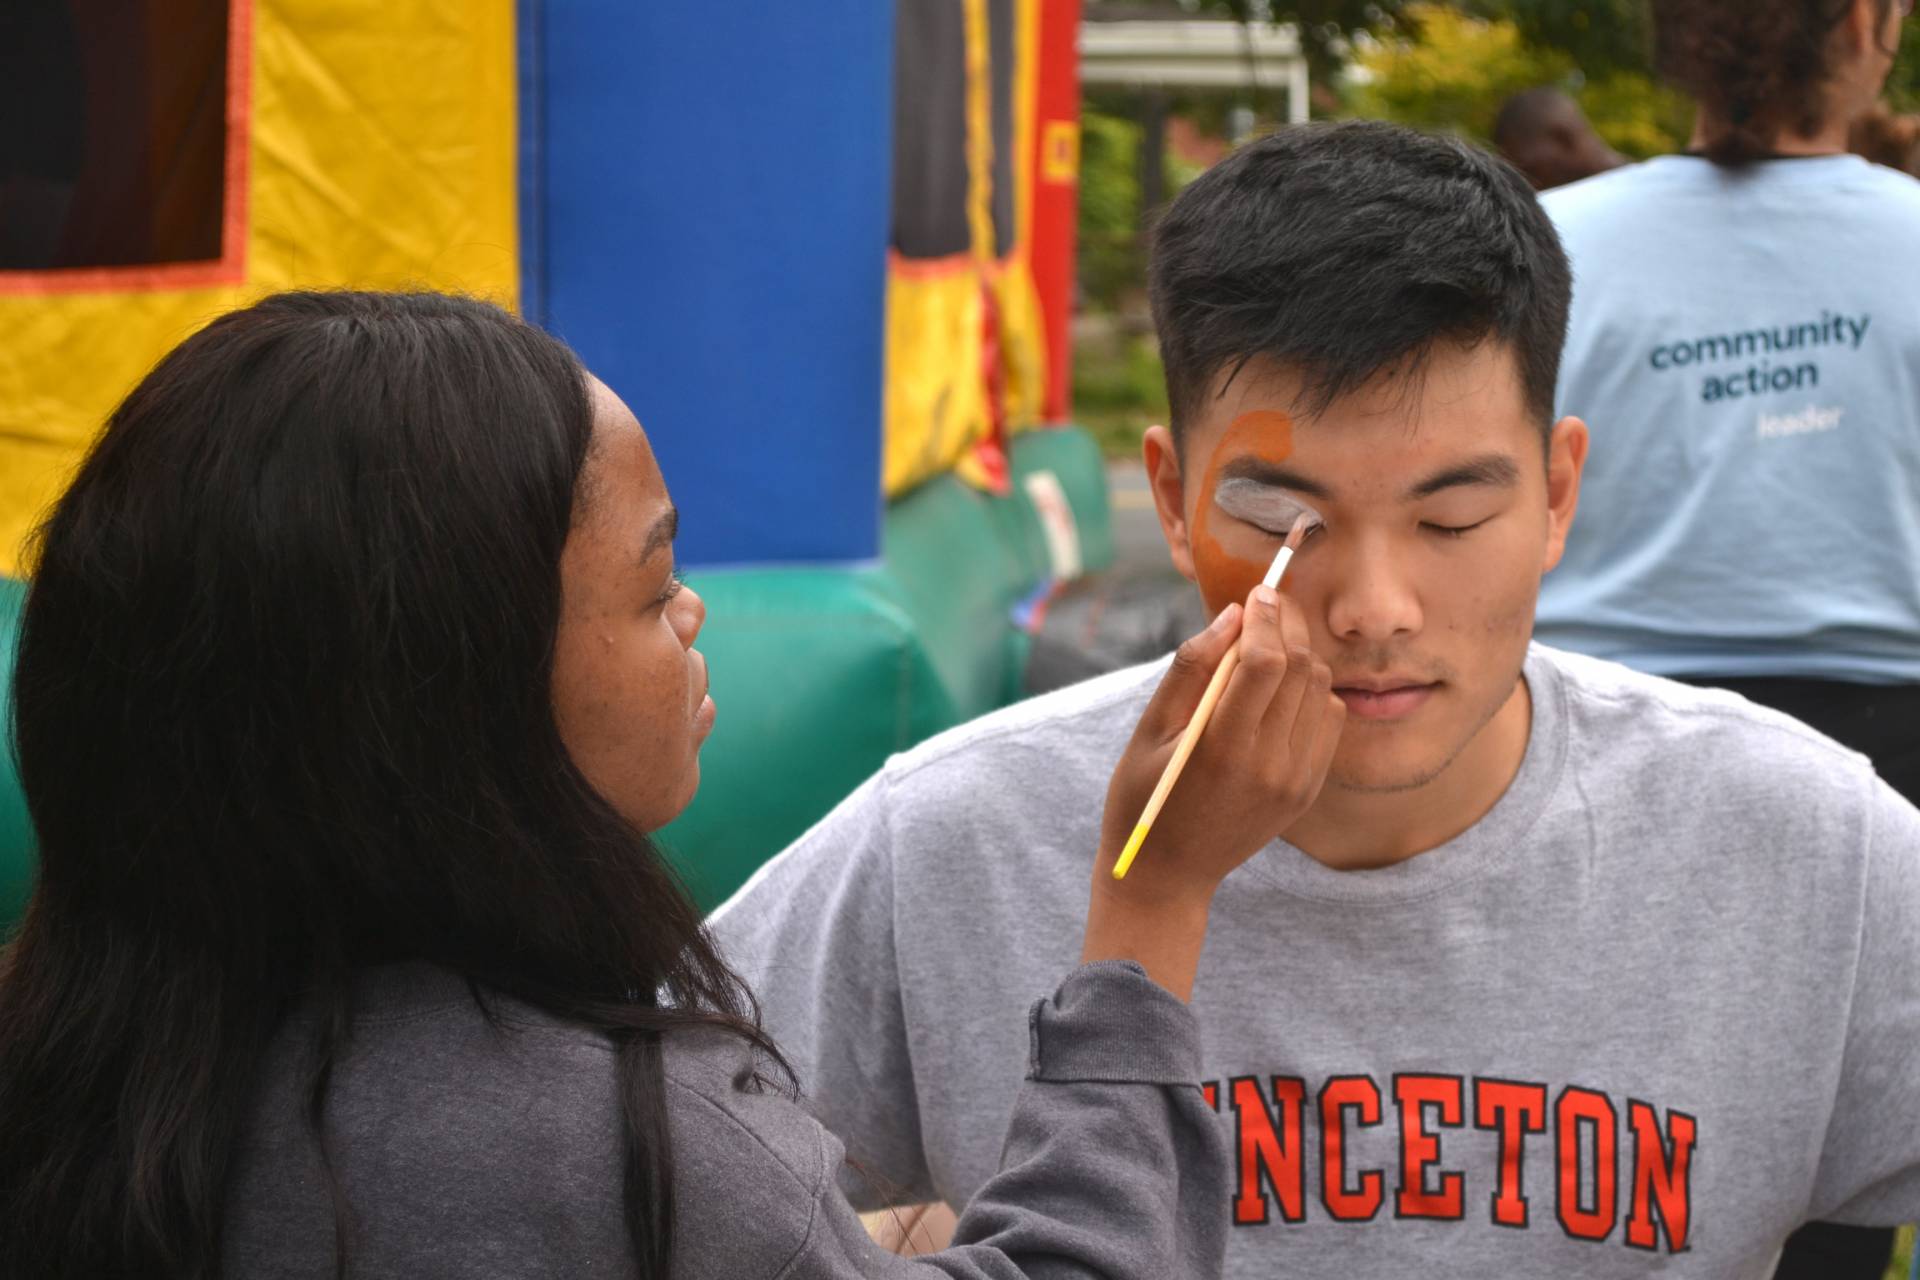 A student applies face paint on another student